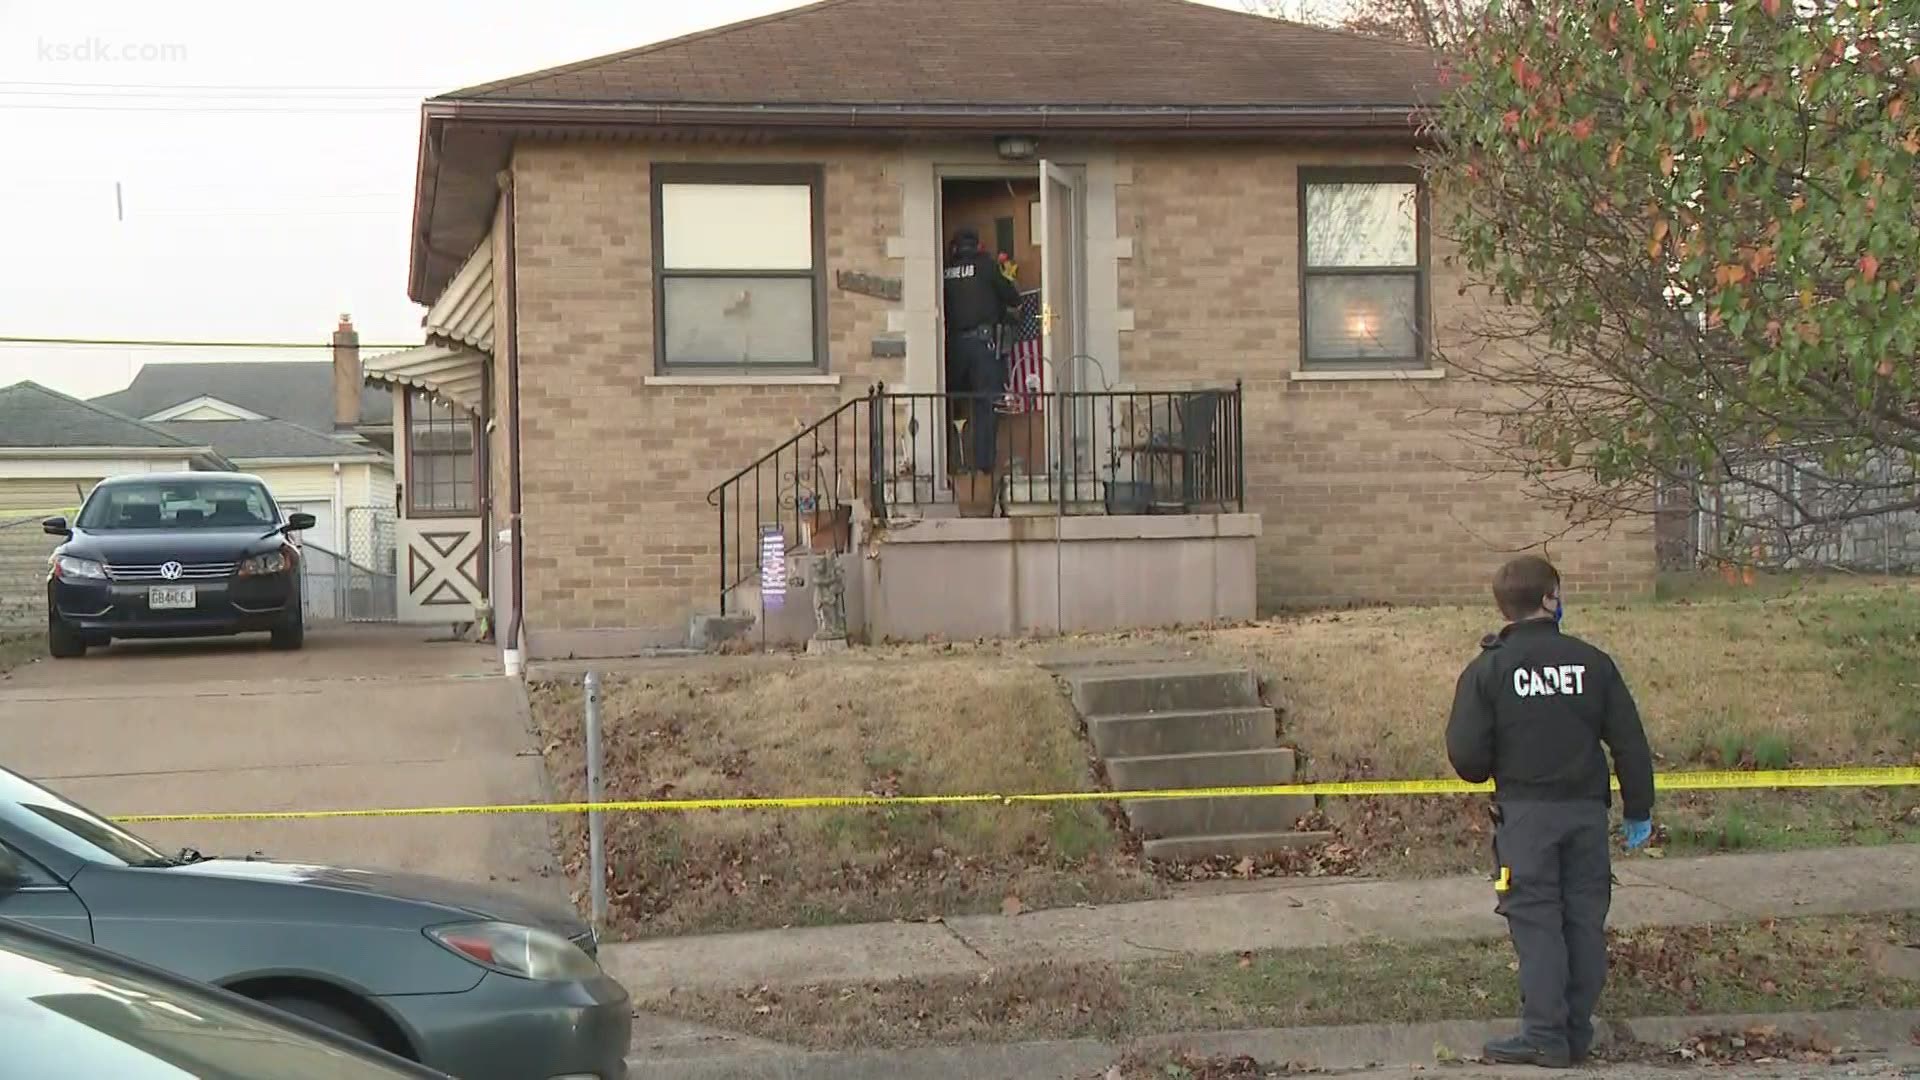 Child, adult found shot to death inside St. Louis home | 0